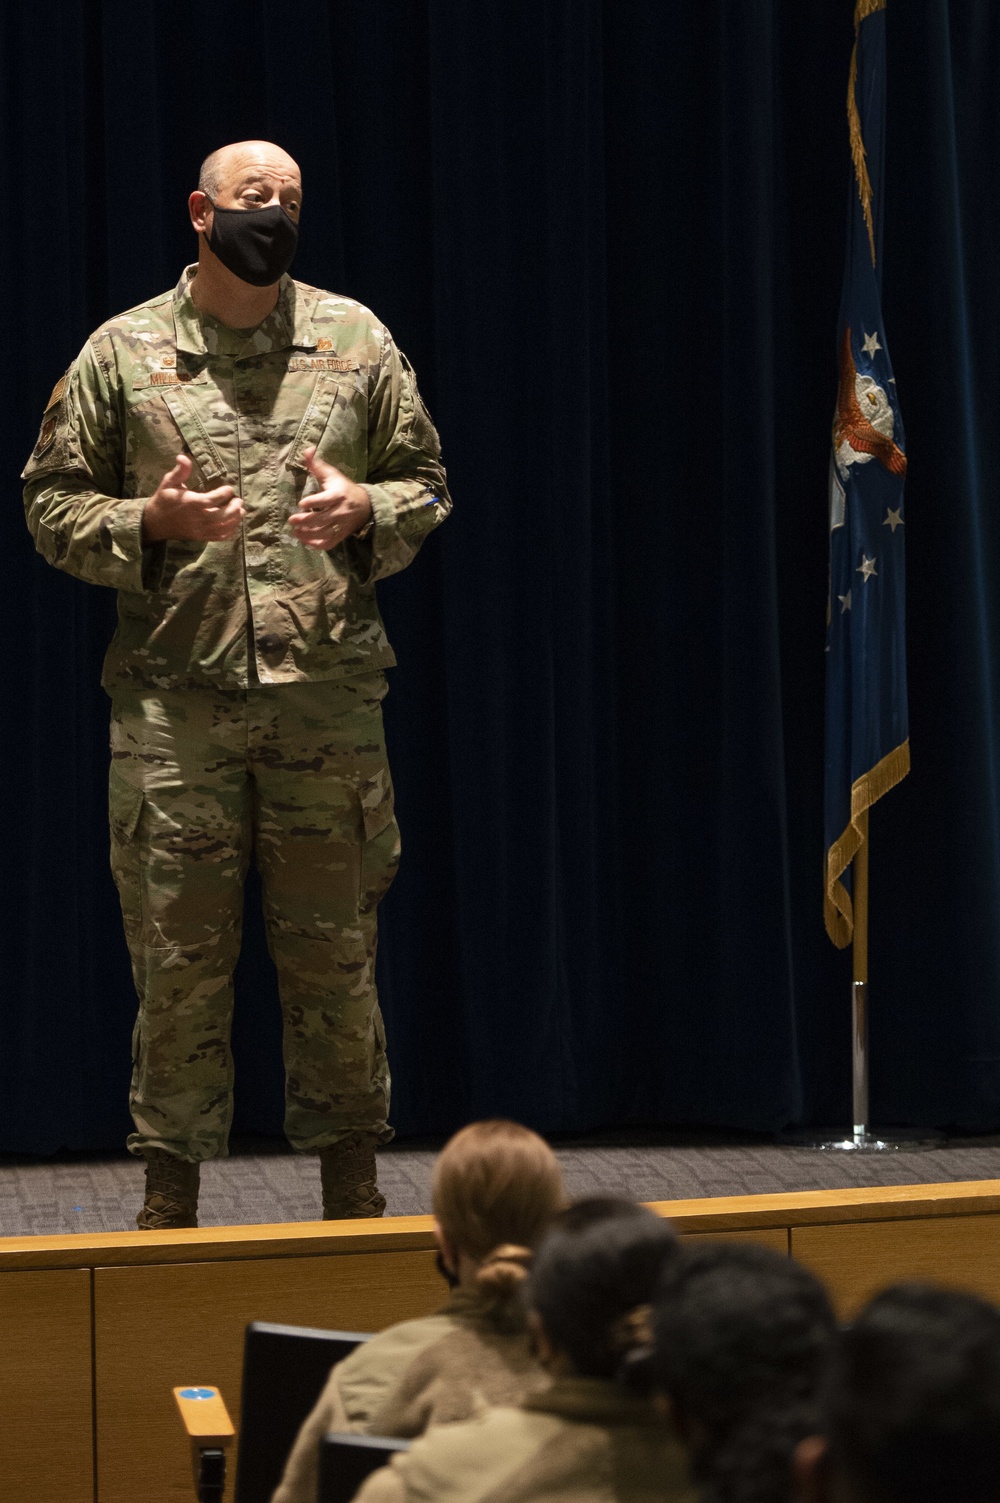 88th Medical Group COVID-19 Deployment